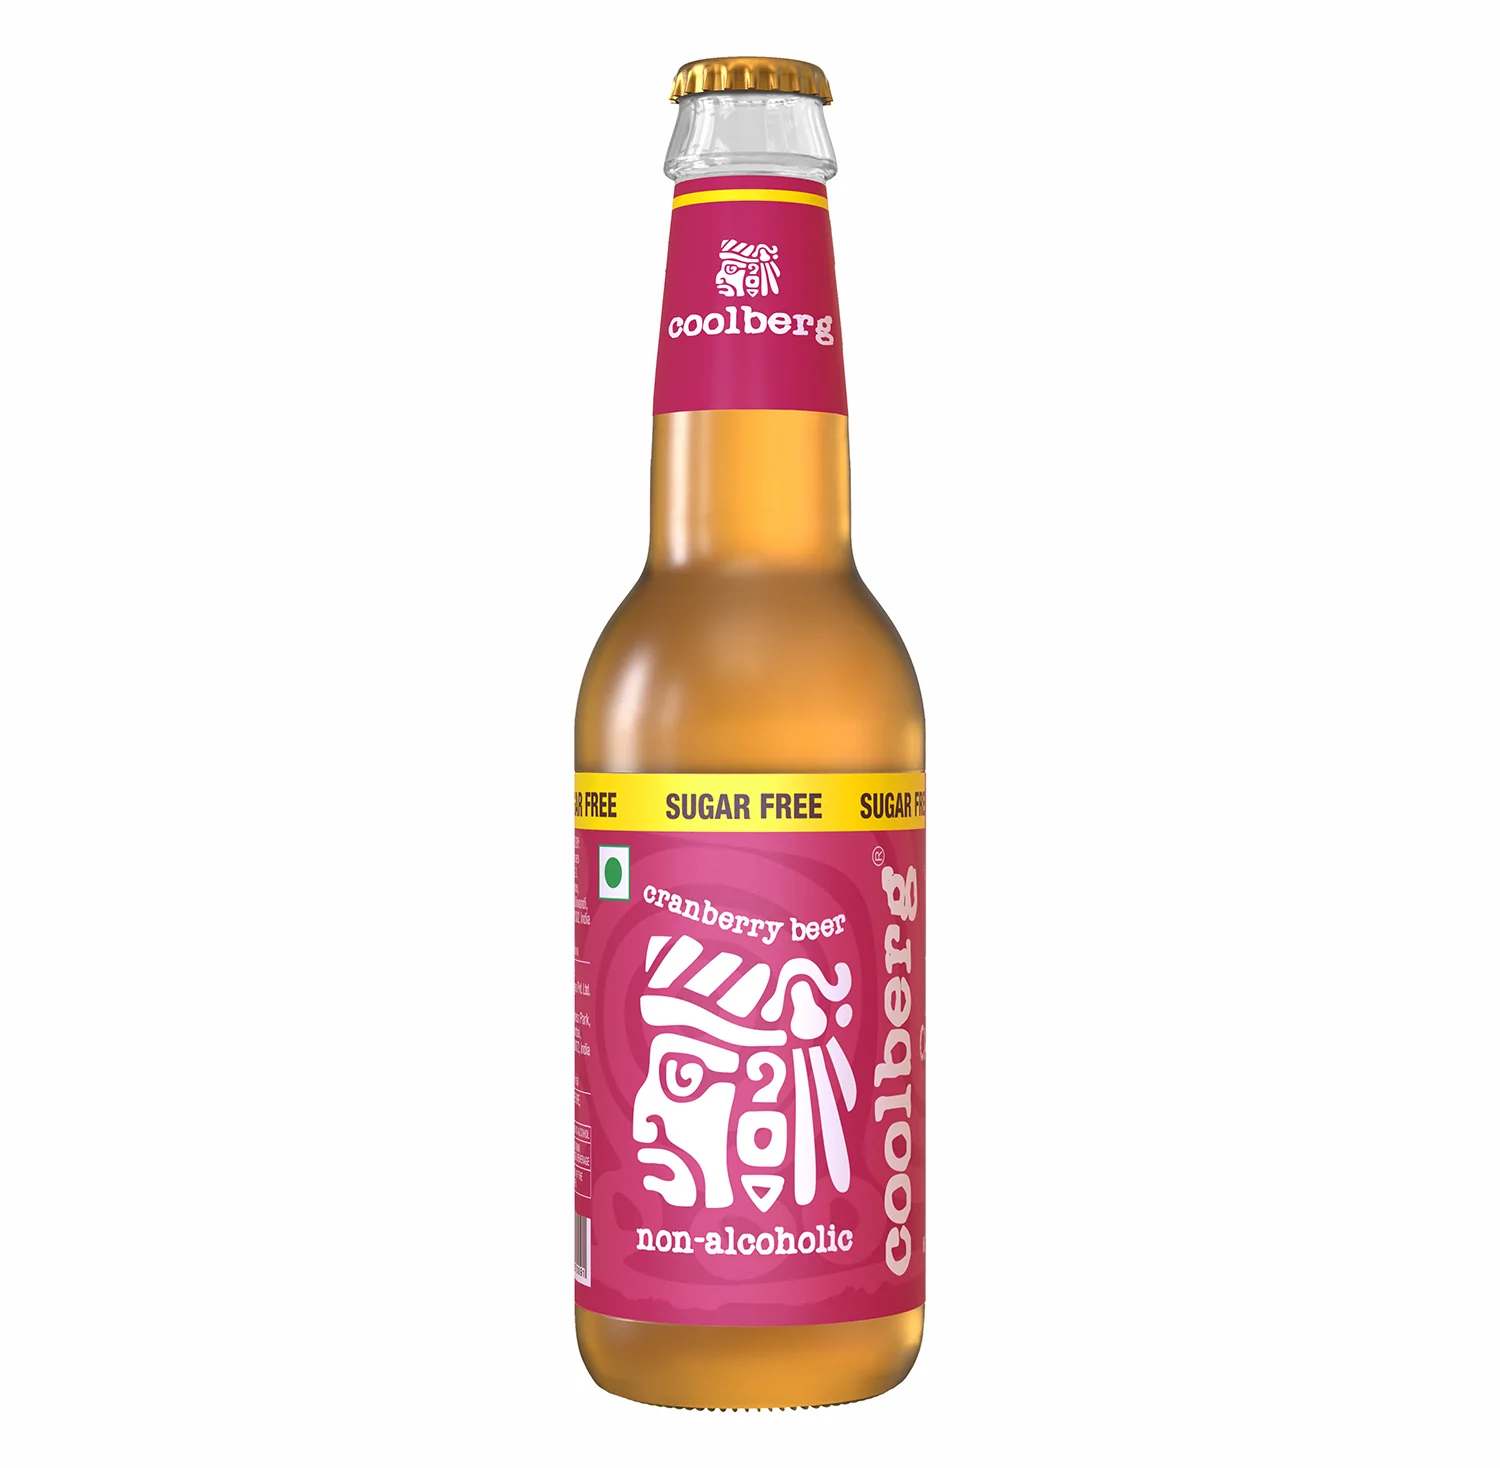 Coolberg Cranberry (Sugar Free) Non Alcoholic Beer Image